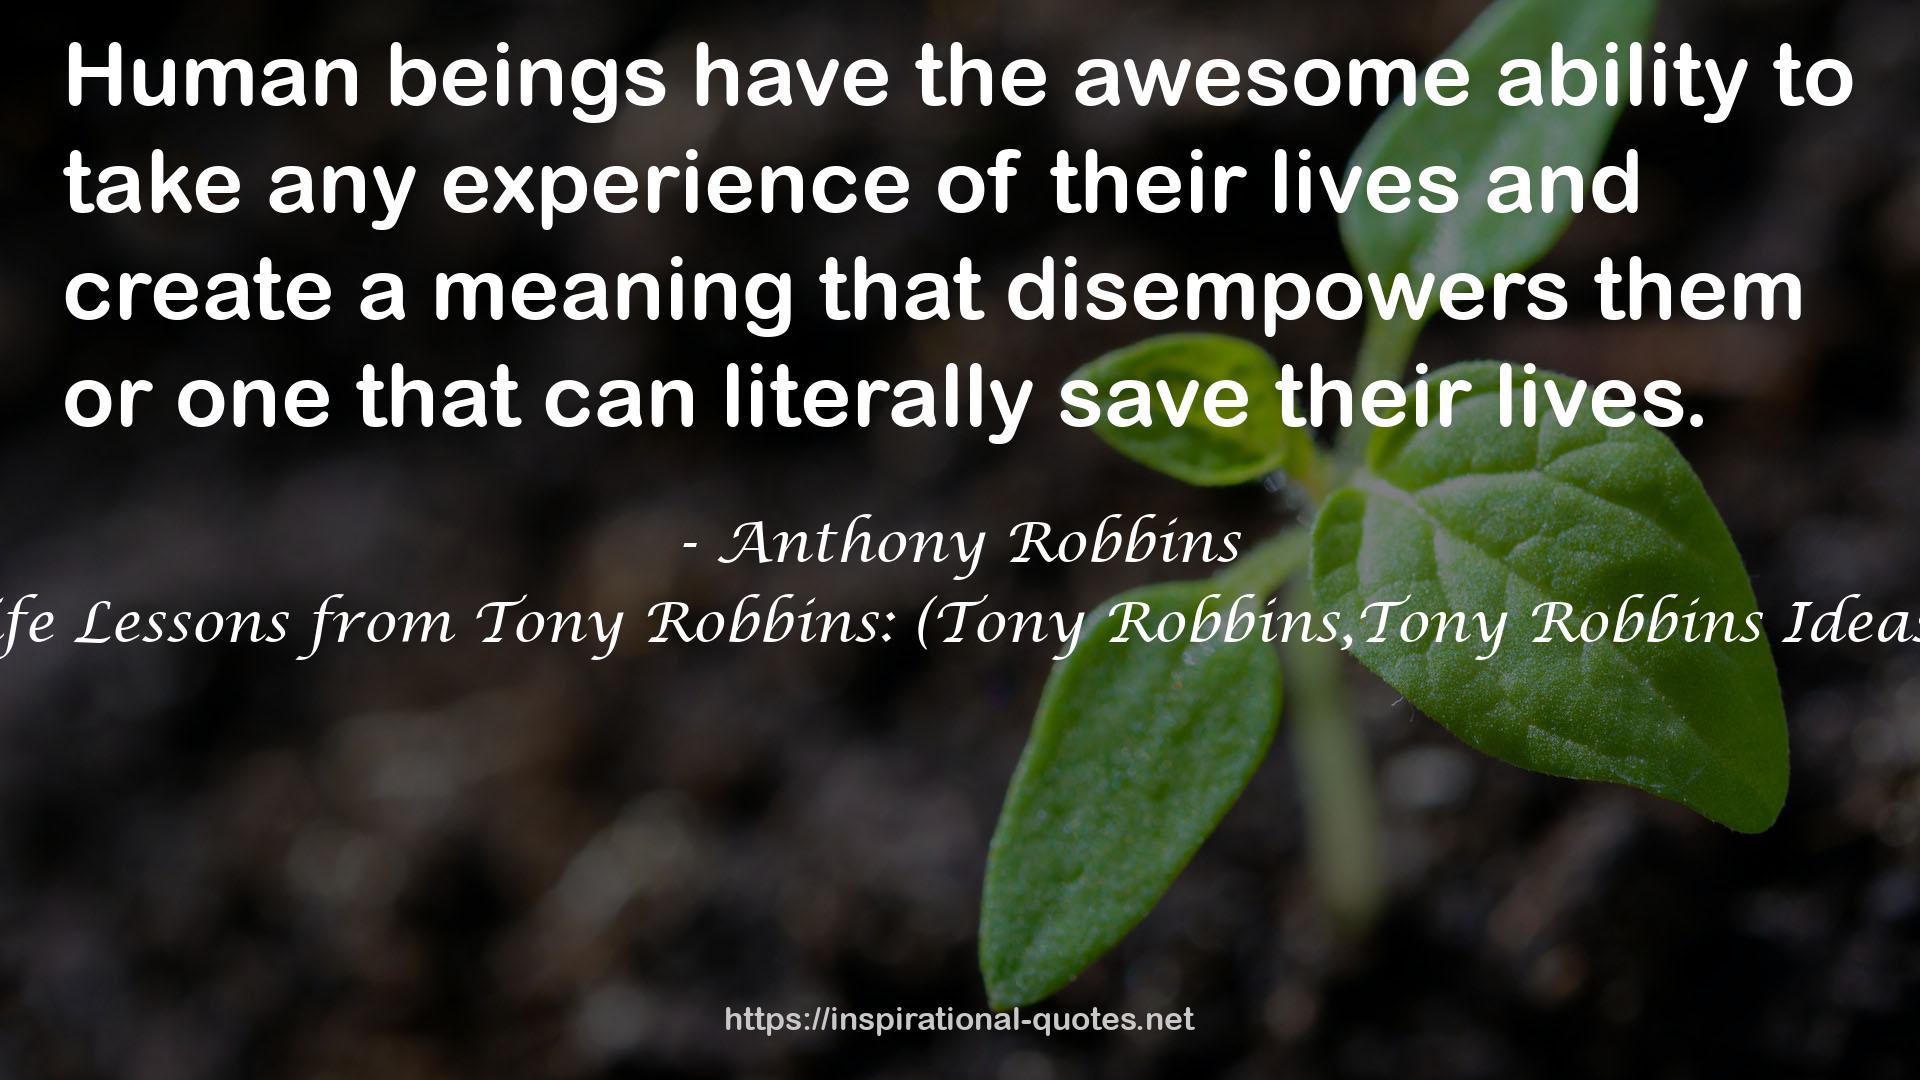 Tony Robbins: 50 Inspirational Life Lessons from Tony Robbins: (Tony Robbins,Tony Robbins Ideas, Motivation, Law of Attraction) QUOTES